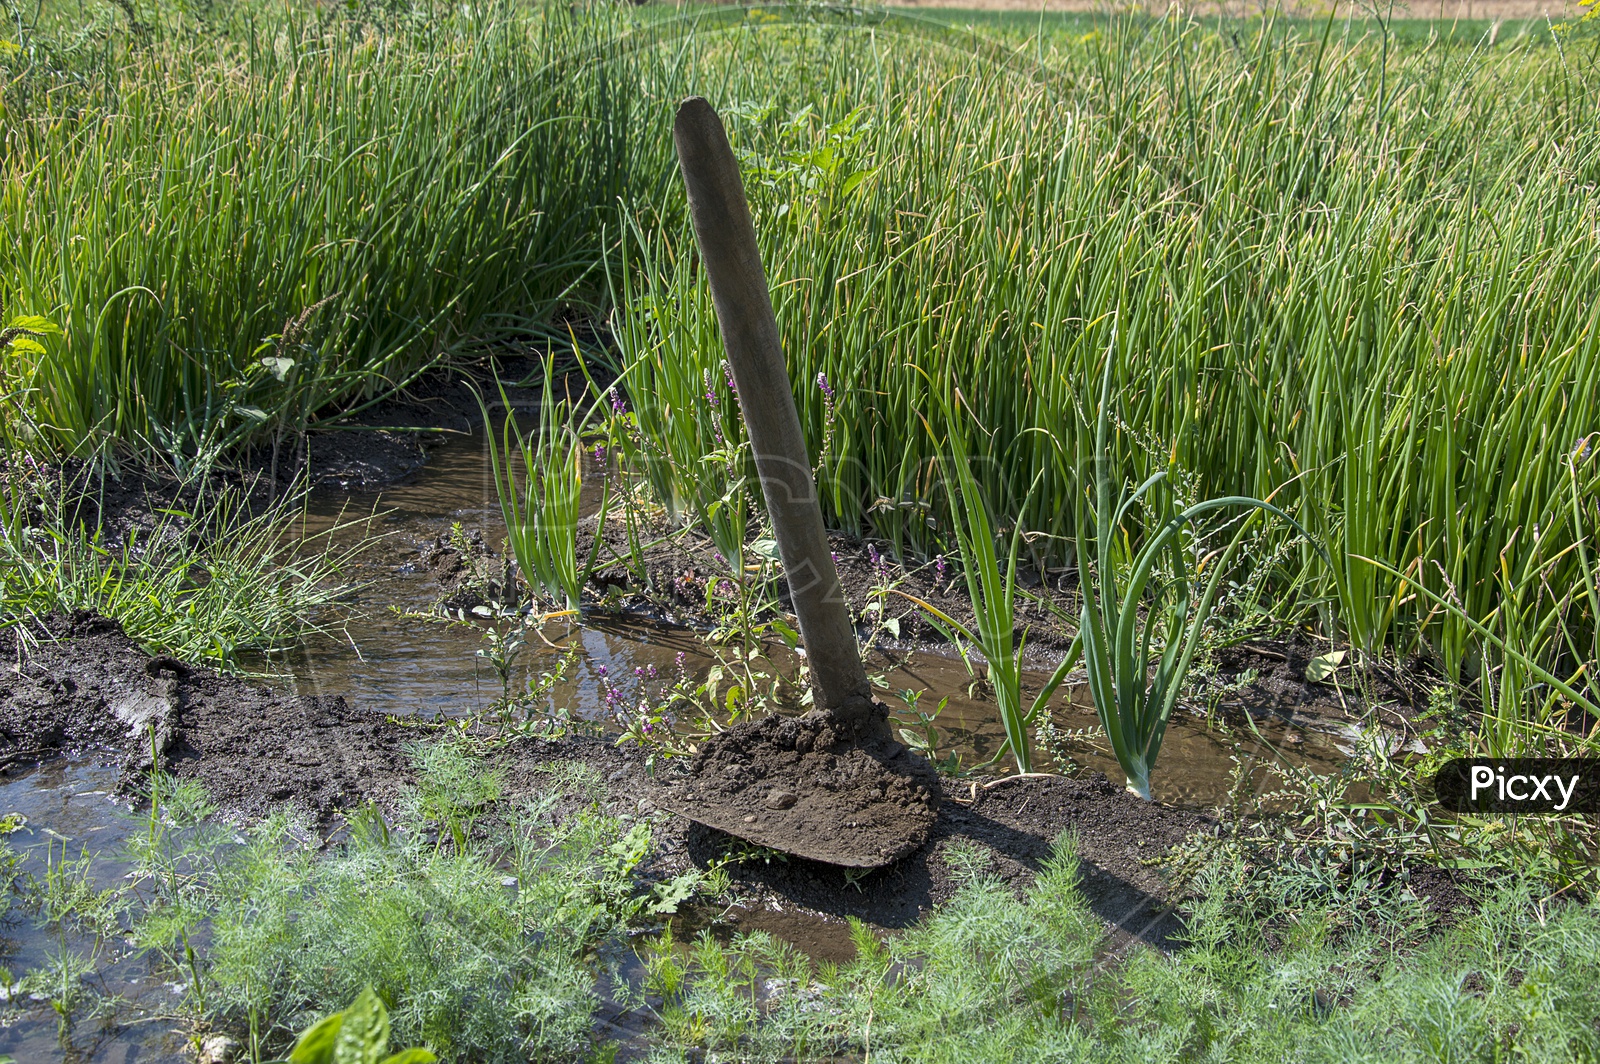 Gardening Tool Hoe For Digging In a Onion Farm